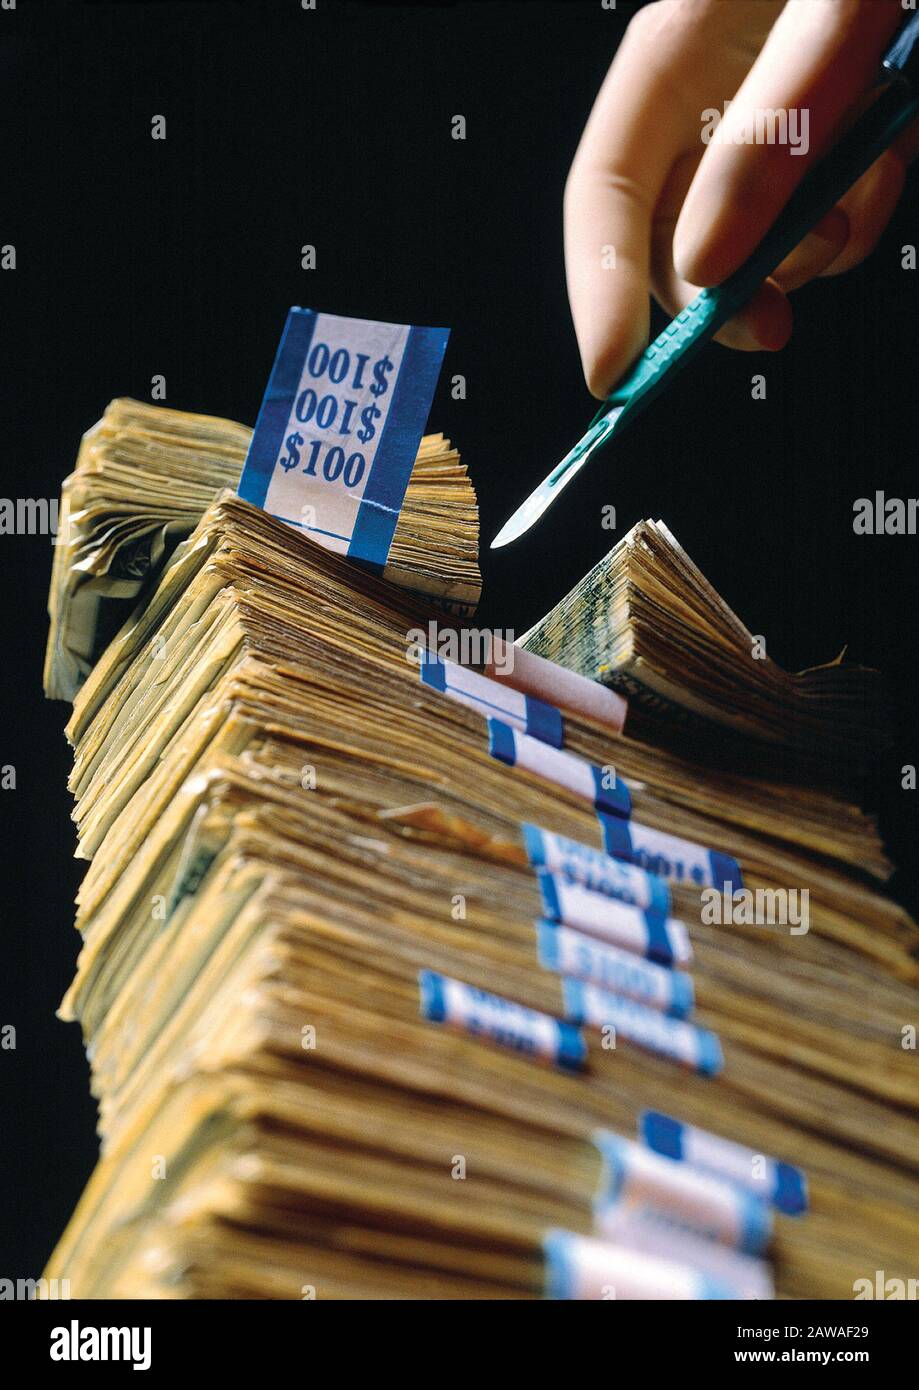 A surgeons hand holding a scalpel cutting through a stack of hundred dollar bills illustrating the high cost of medical care Stock Photo